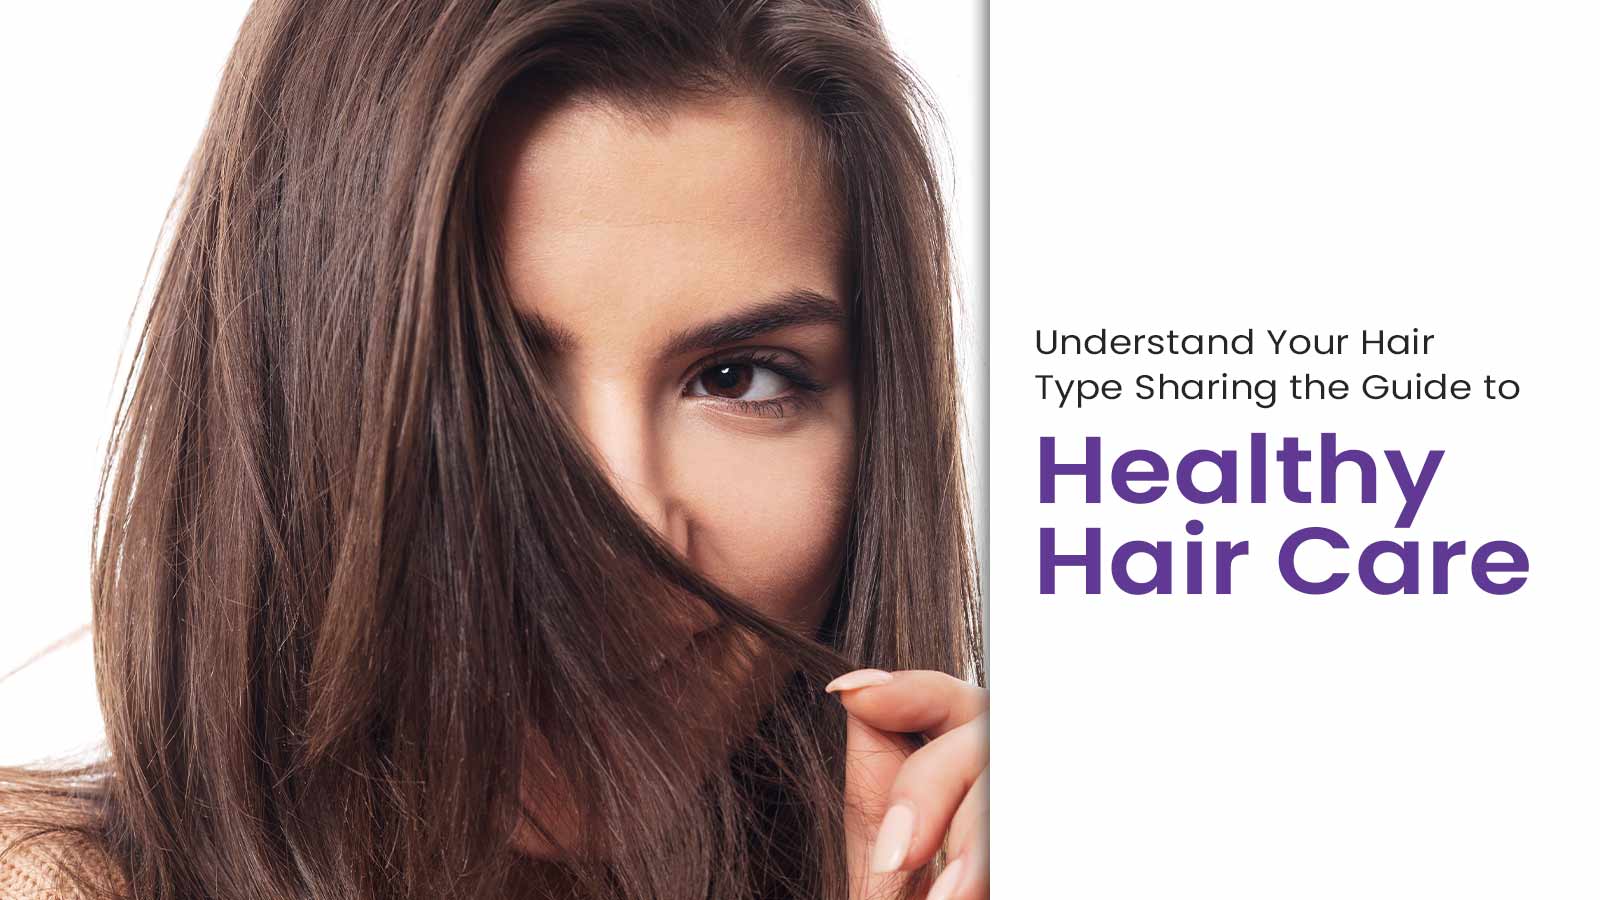 Understand Your Hair Type! Sharing the Guide to Healthy Hair Care